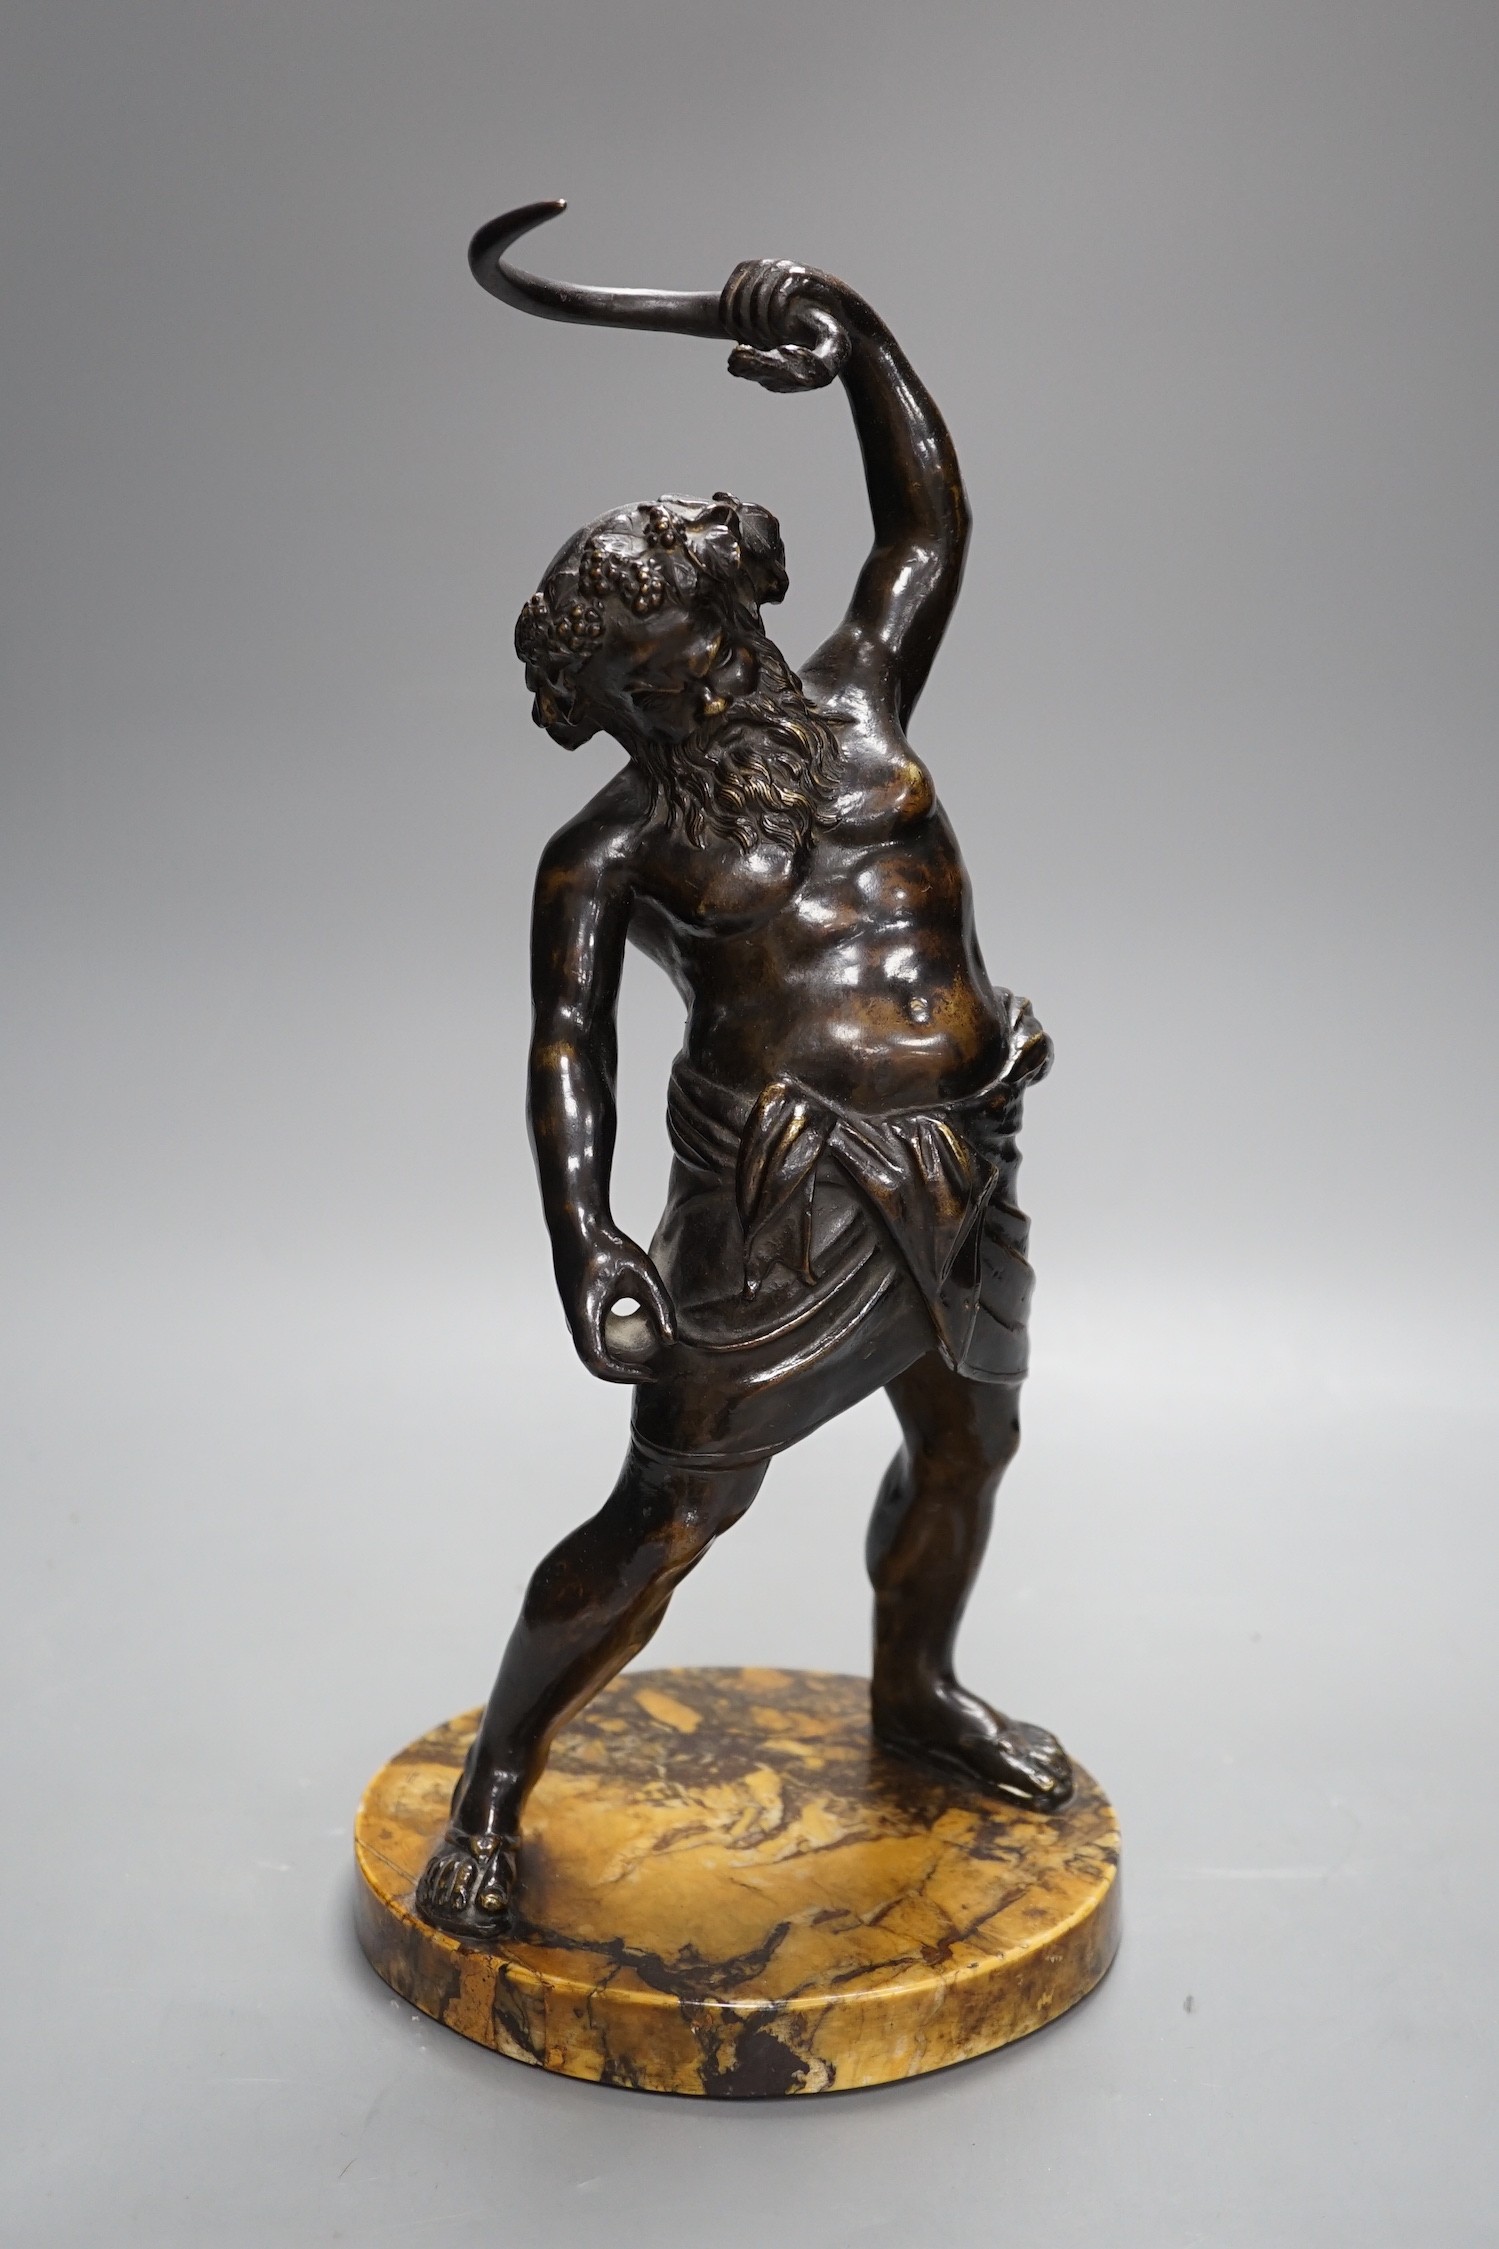 After the antique - a 19th century century bronze figure of the Drunken Silenus height 36cm